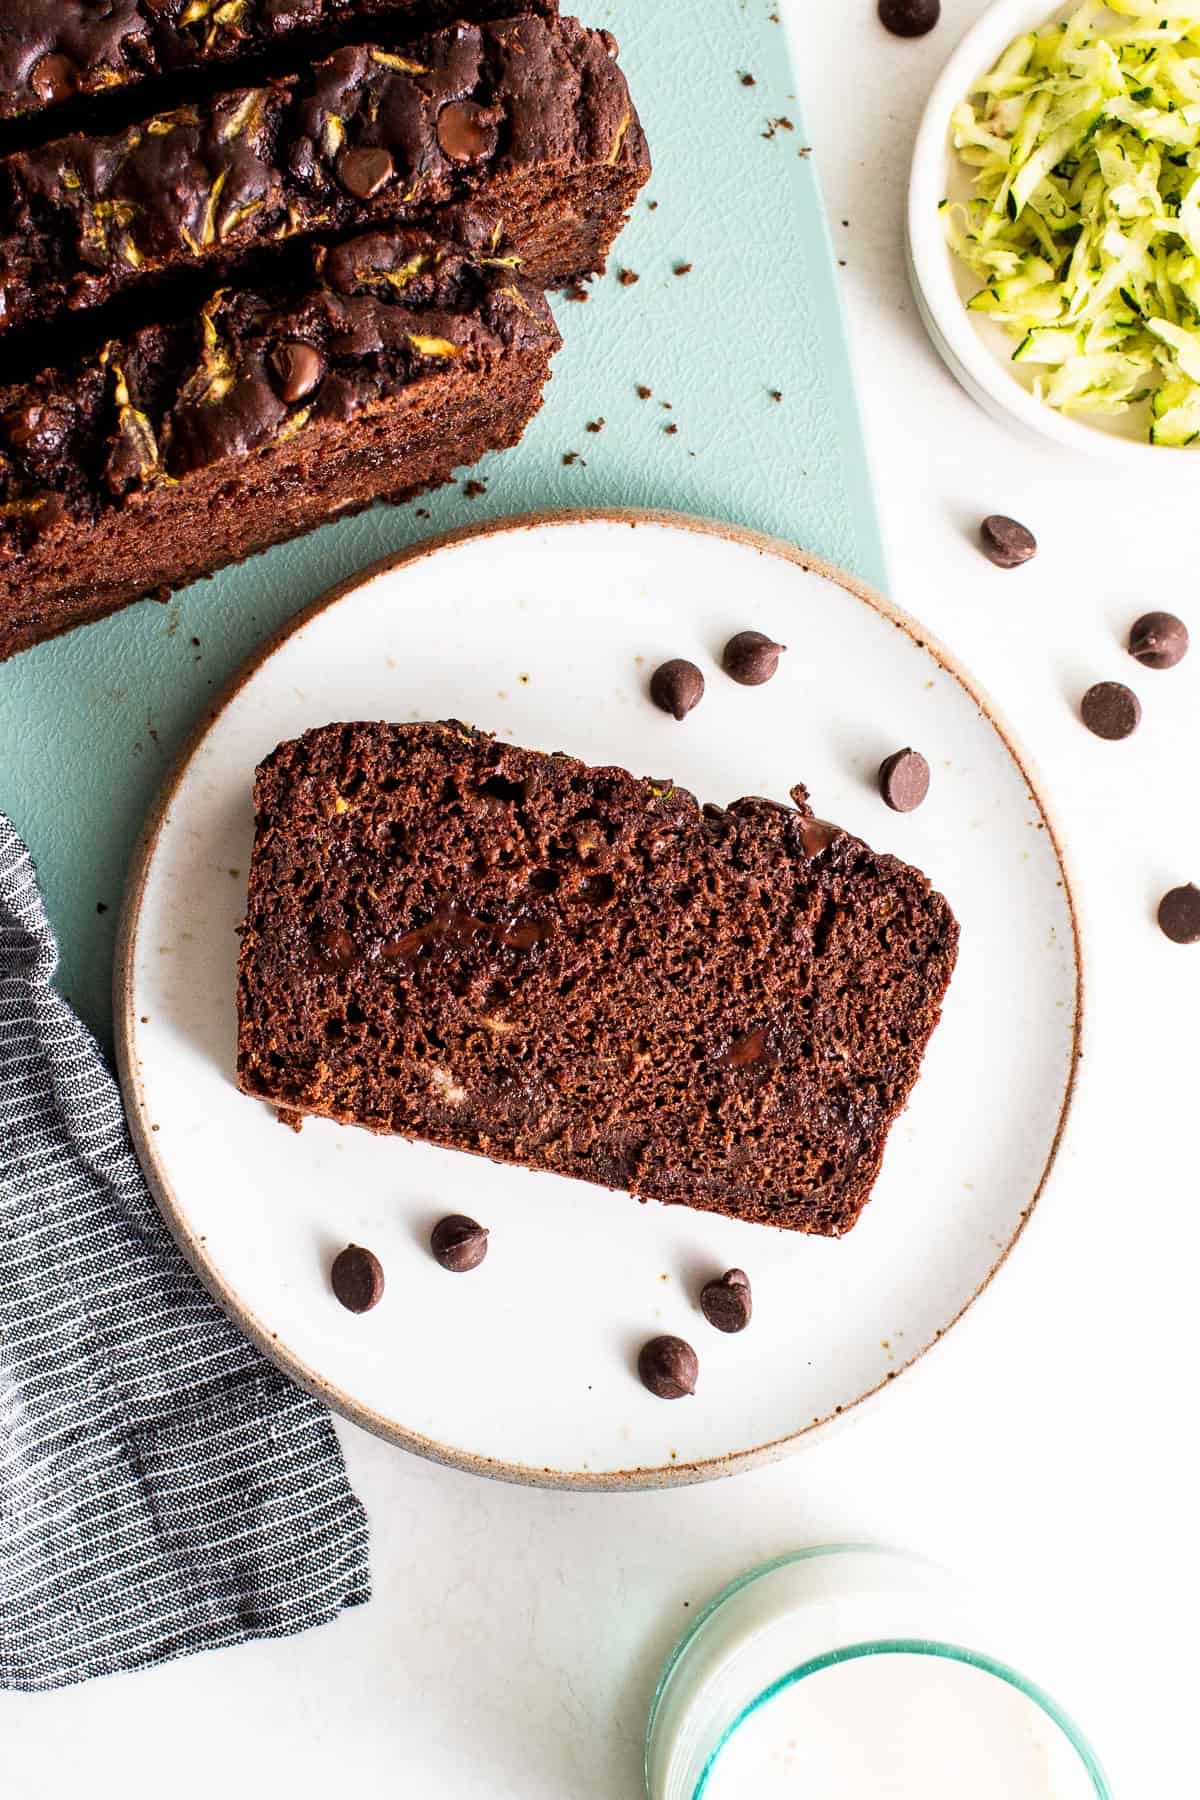 Slice of chocolate zucchini bread on a plate.